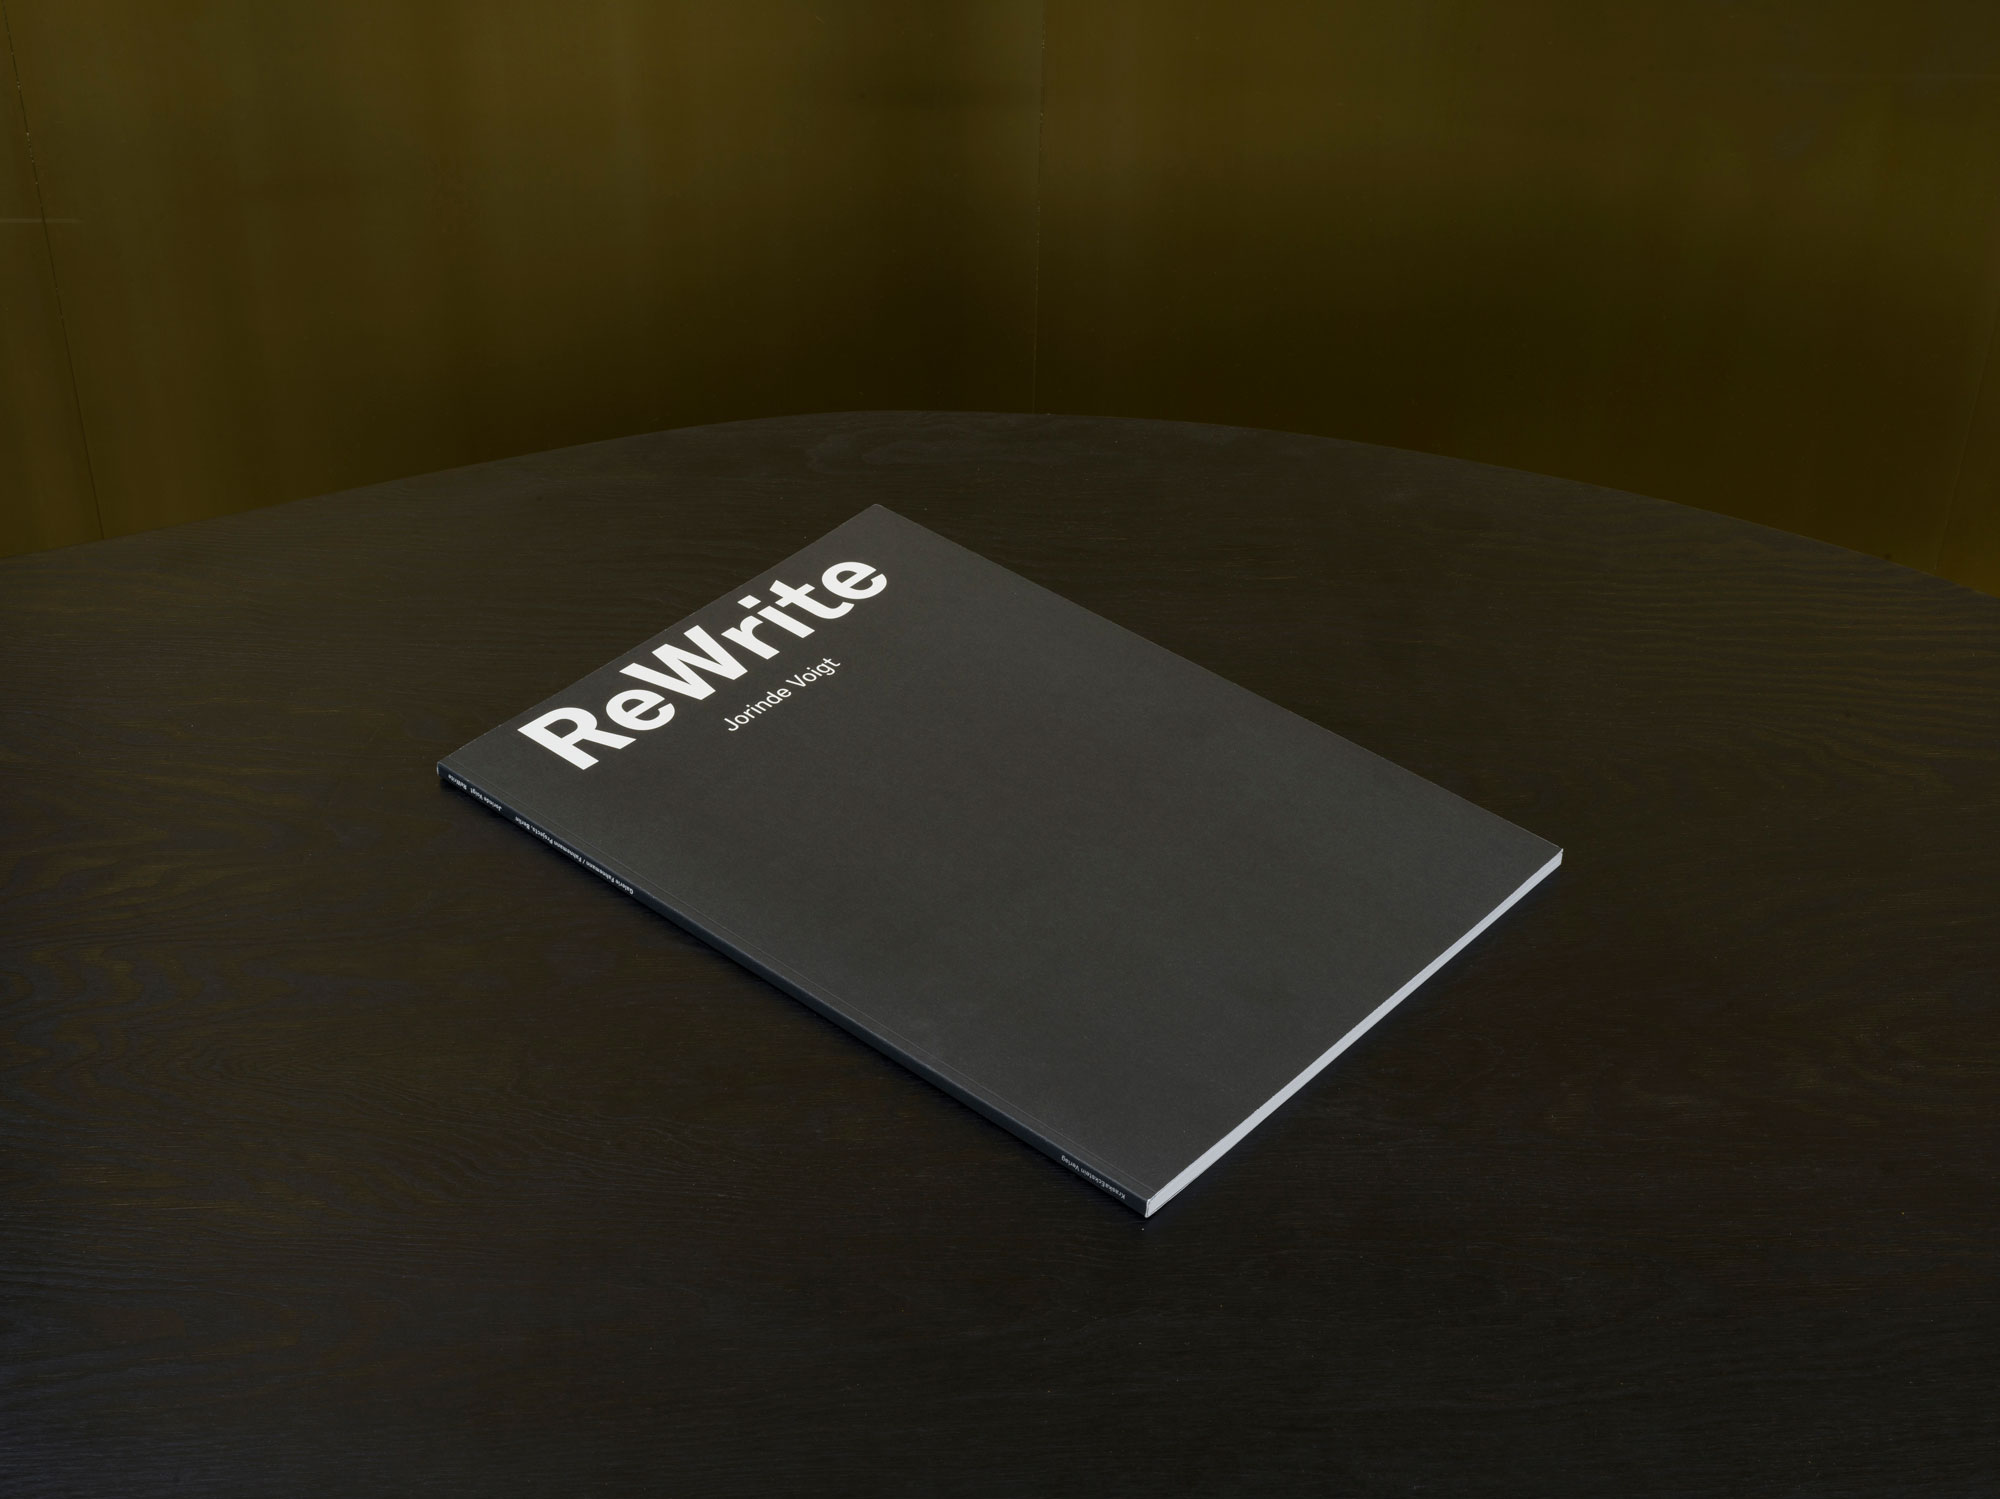 Jorinde Voigt – ReWrite, Catalog on the occasion of the same entitled exhibition at Galerie Fahnemann, Fahnemann Projects, Berlin, Editor: Clemens Fahnemann, Jorinde Voigt, Text: Andrew Cannon, Language: English, German, total pages: 67, Publishing: KraskaEckstein Verlag, ISBN: 978-3-940717-04-7, Price: €15,00